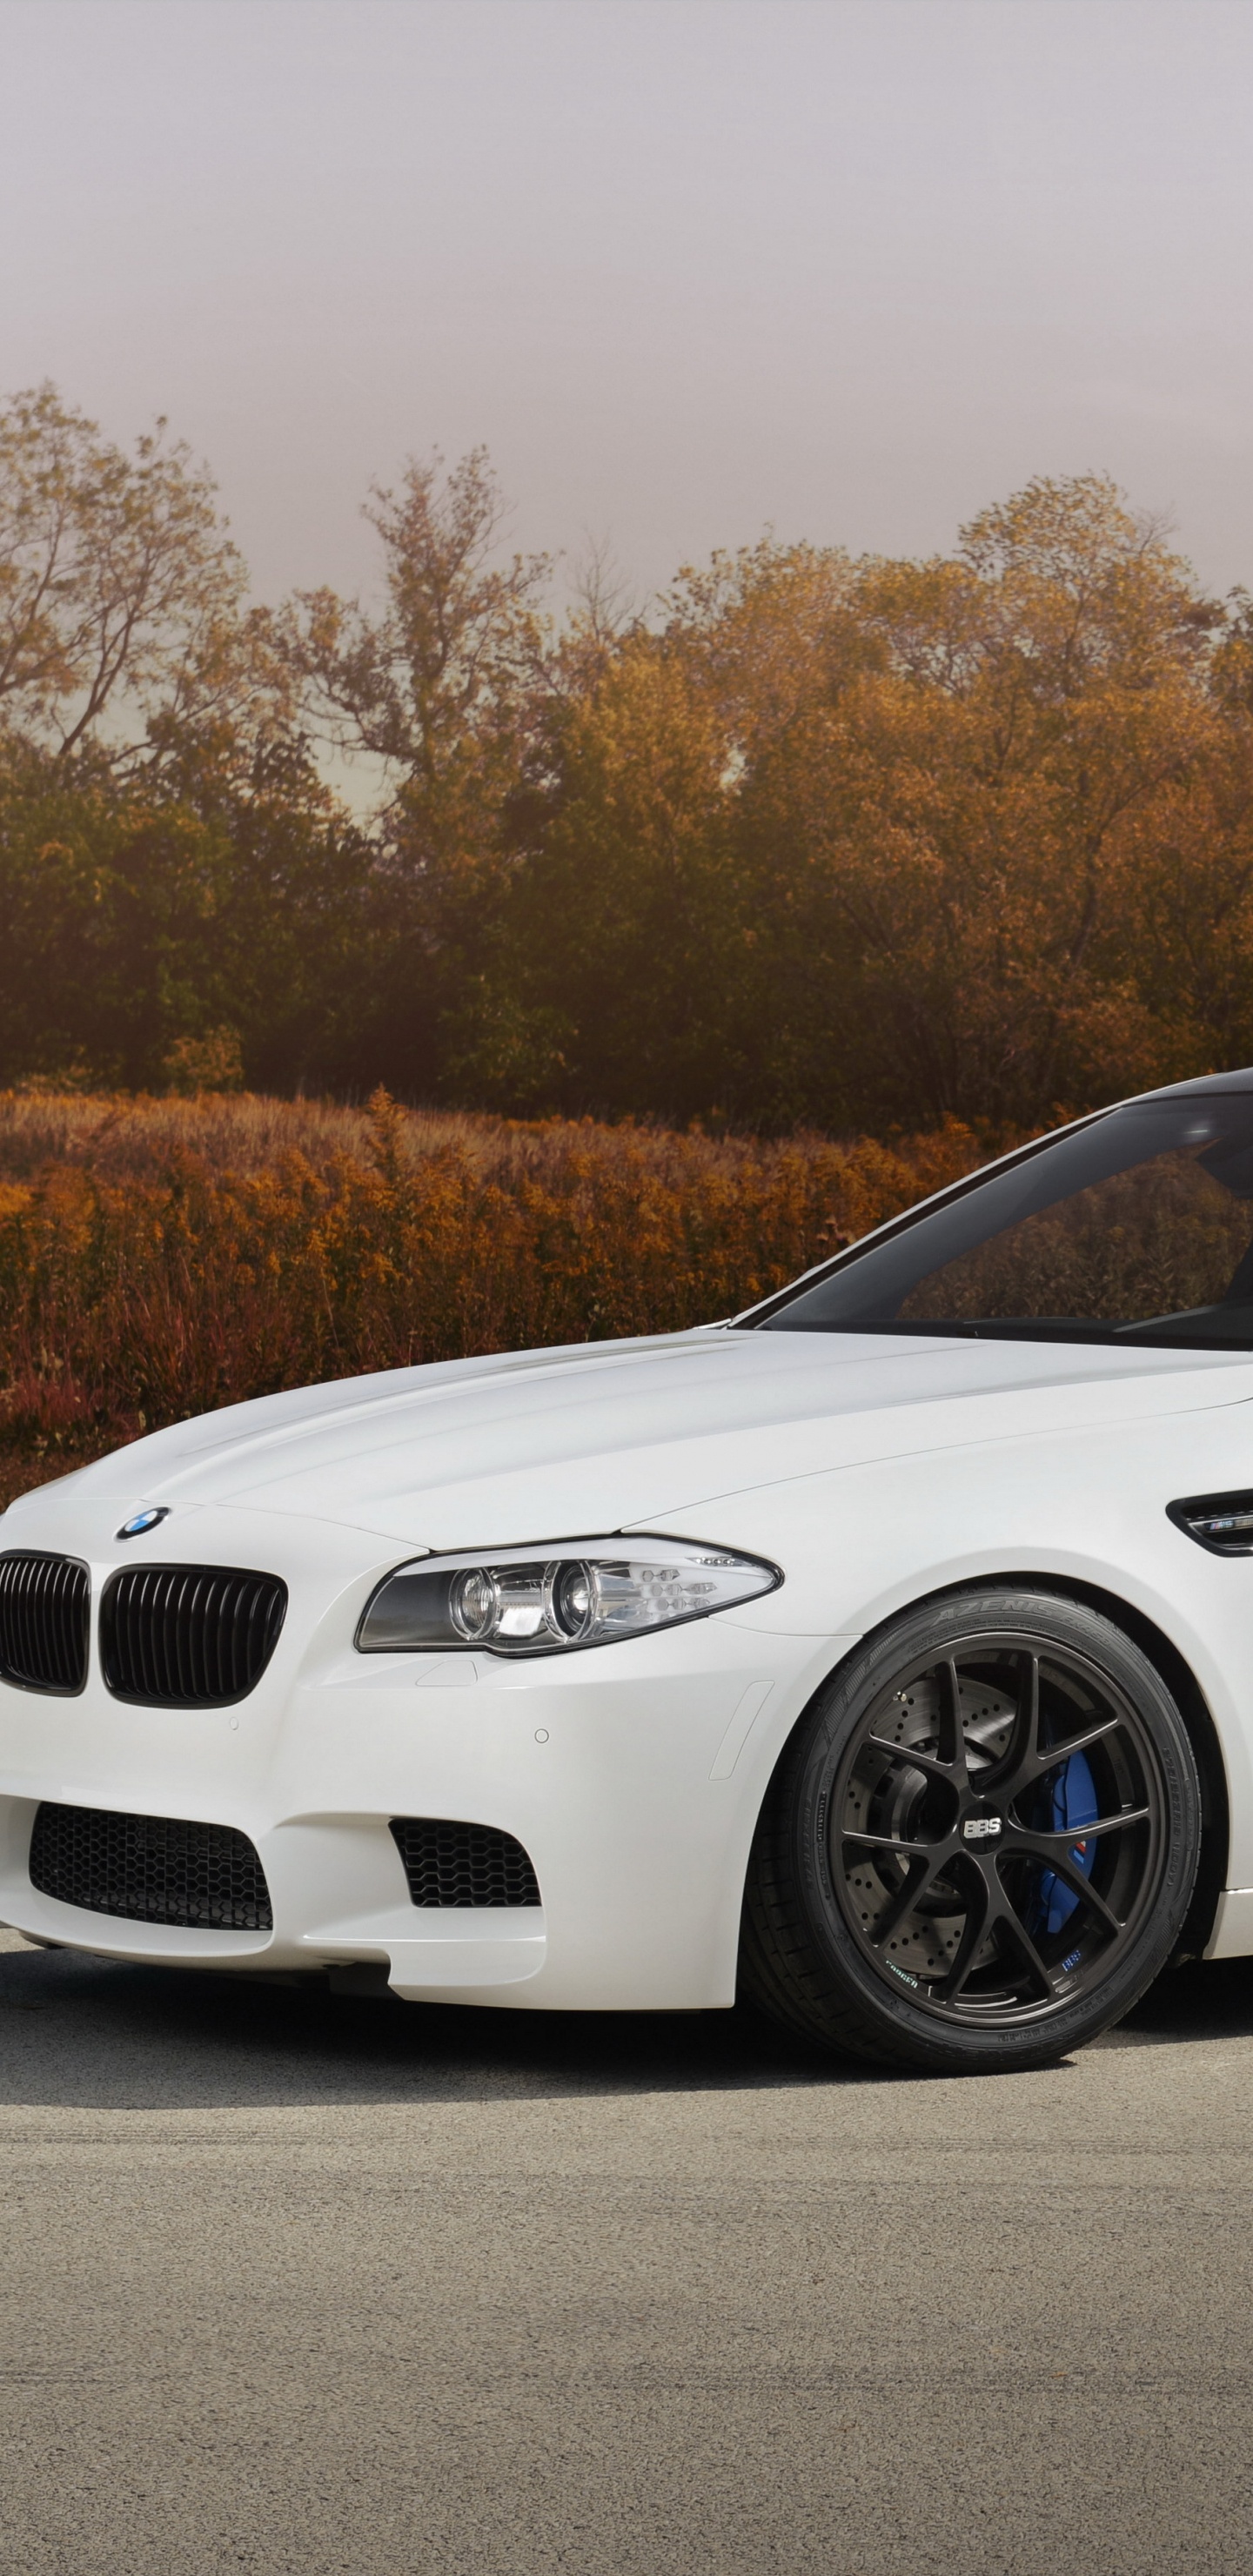 White Bmw m 3 Coupe Parked on Gray Asphalt Road During Daytime. Wallpaper in 1440x2960 Resolution